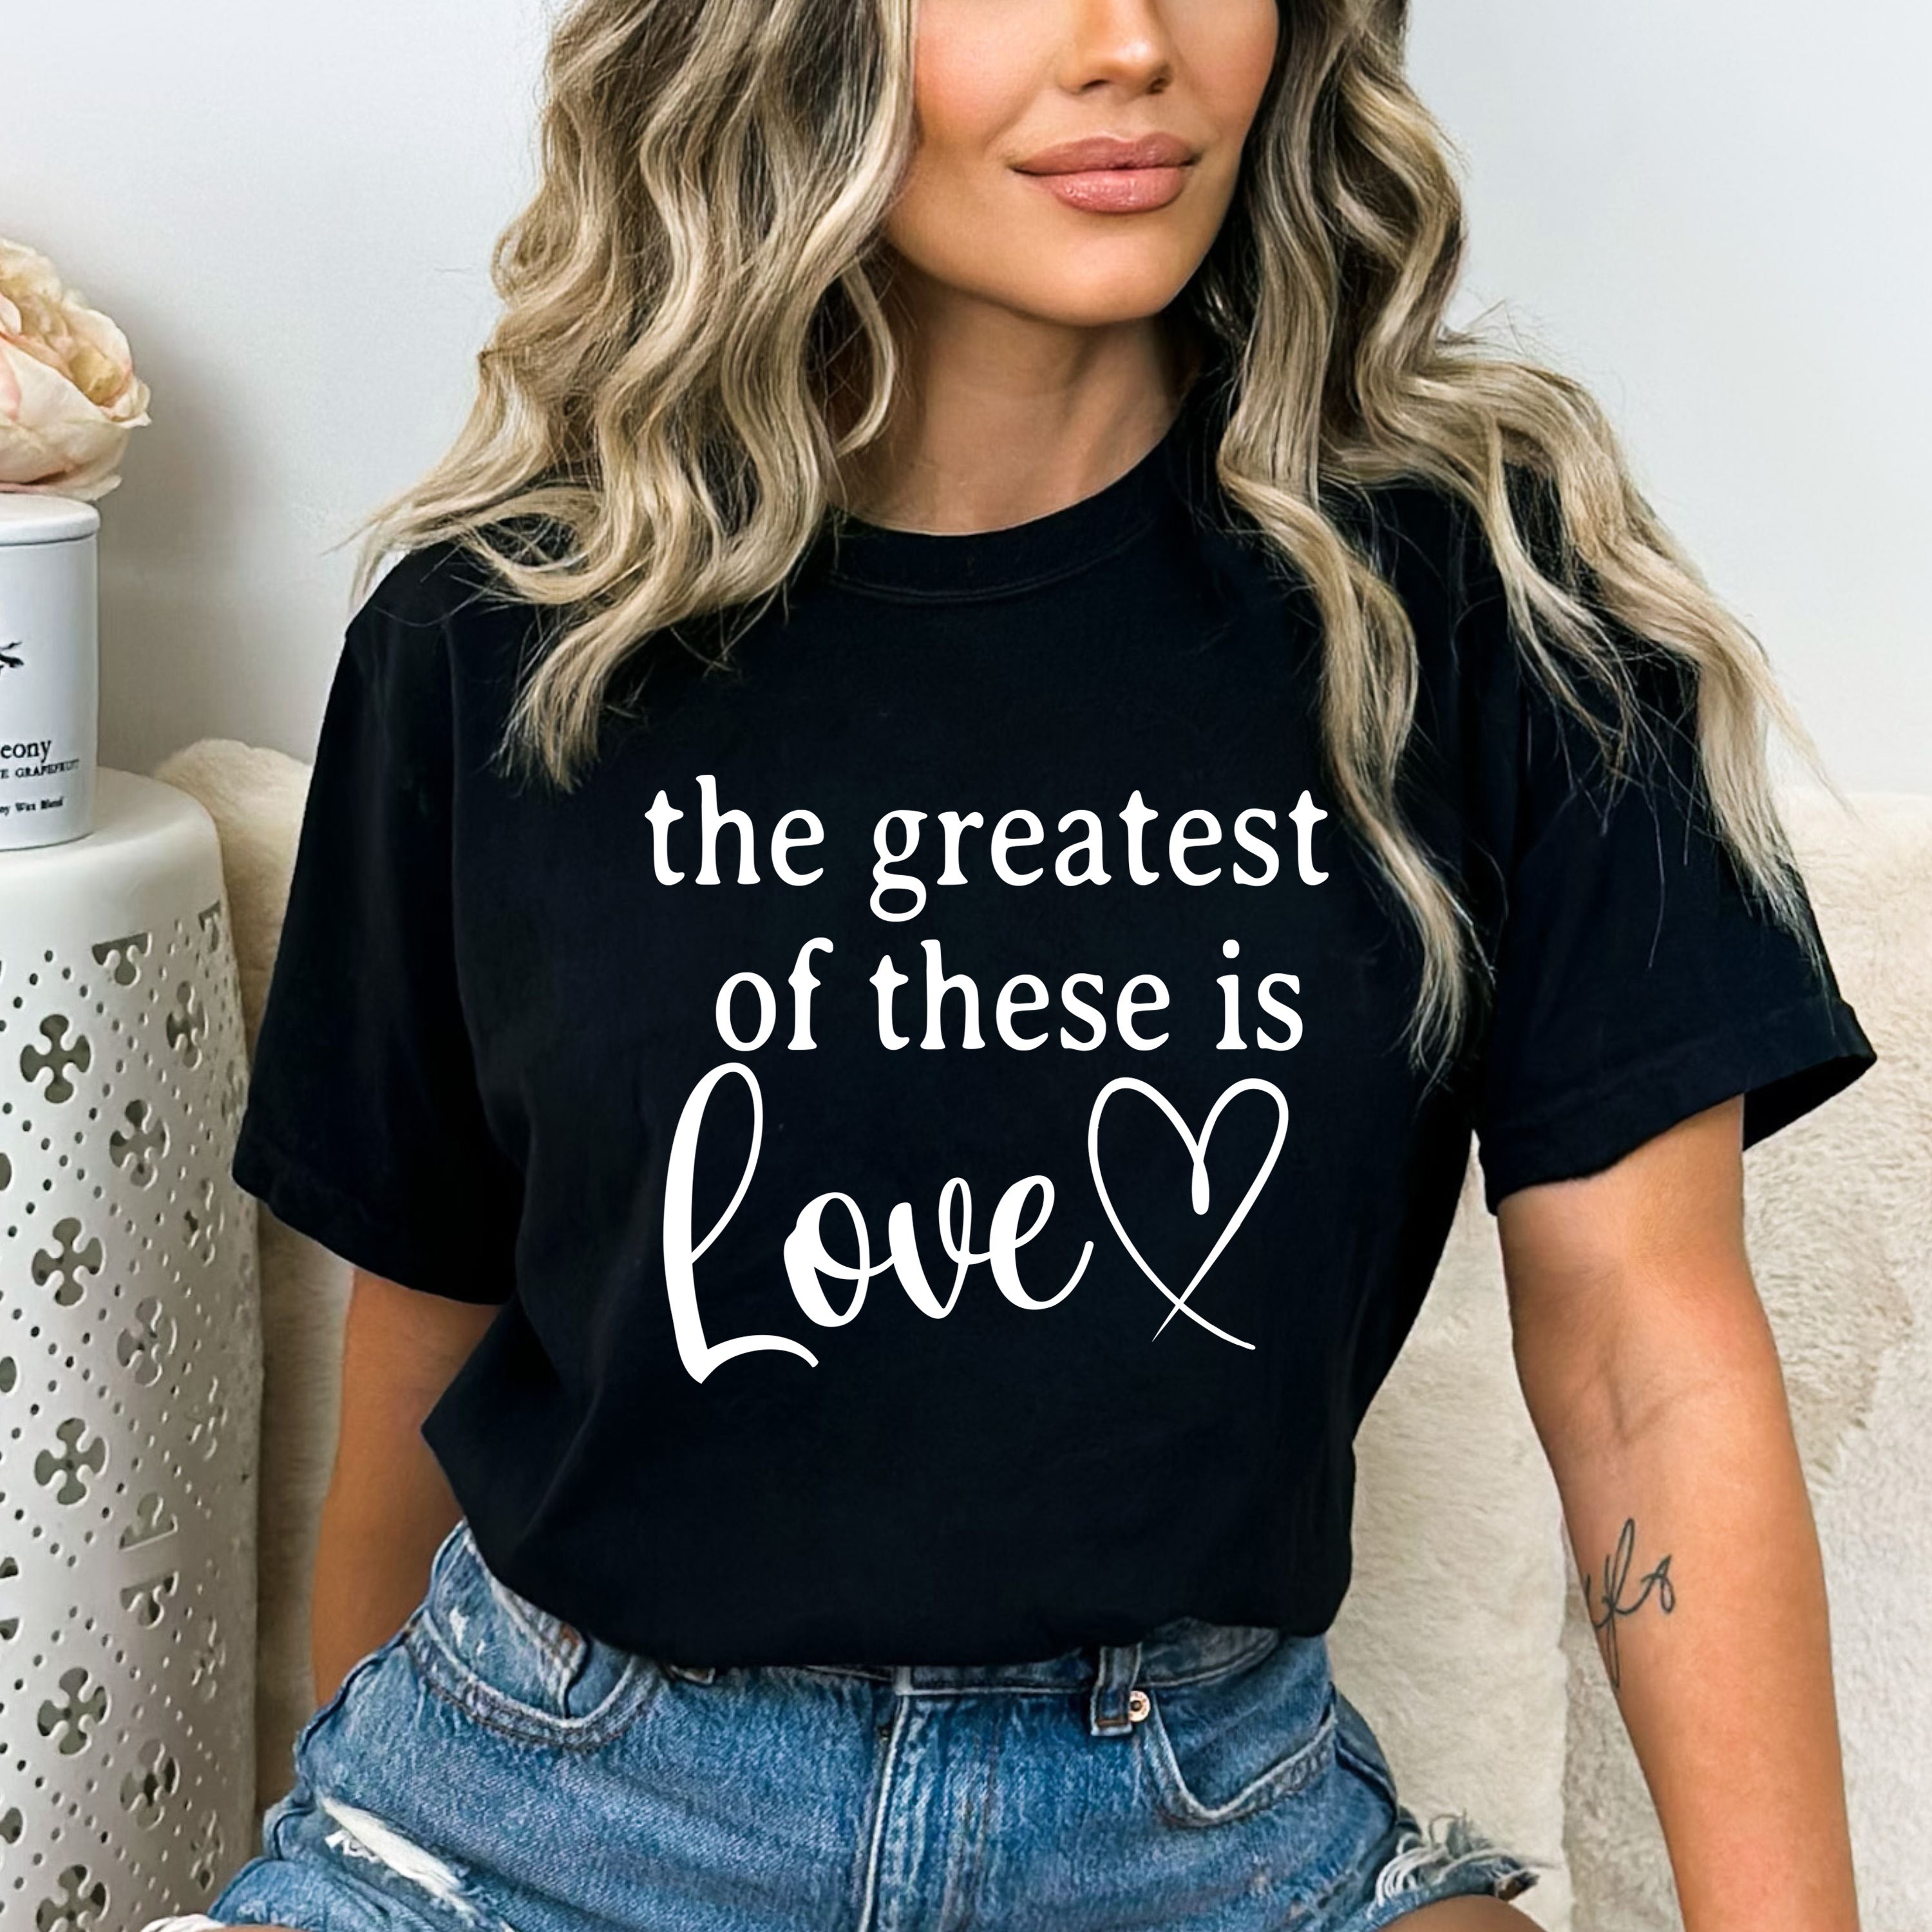 The Greatest Of These Is Love - Bella canvas